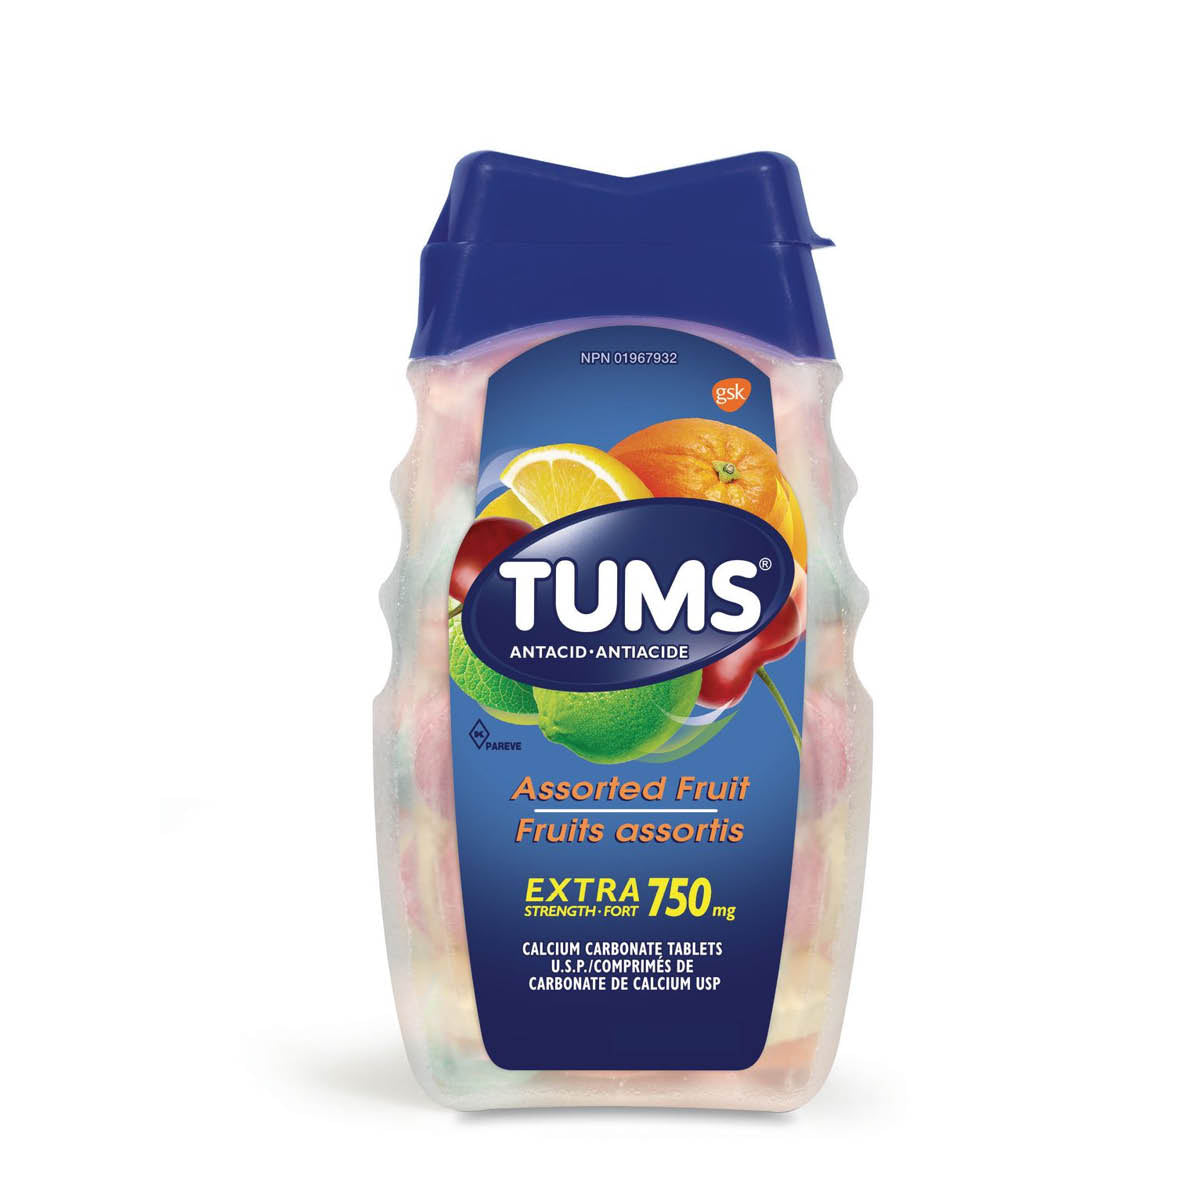 Tums Extra Strength Antacid for Heartburn Relief, 750 mg